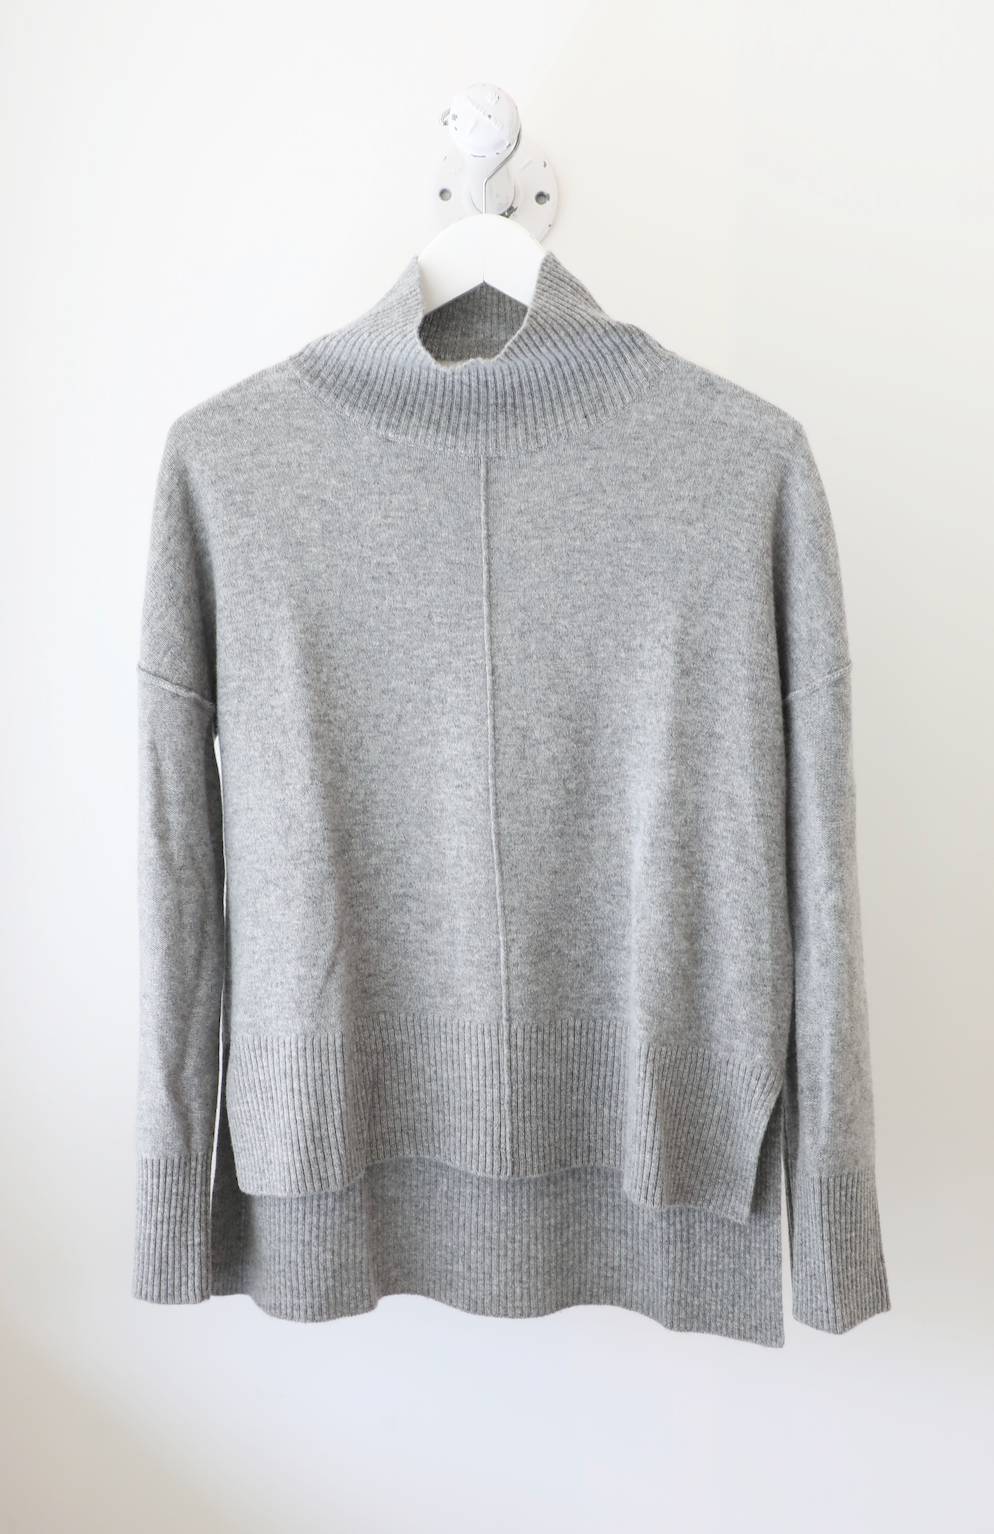 Eleis Collective - The Swing Turtleneck in Heather Grey